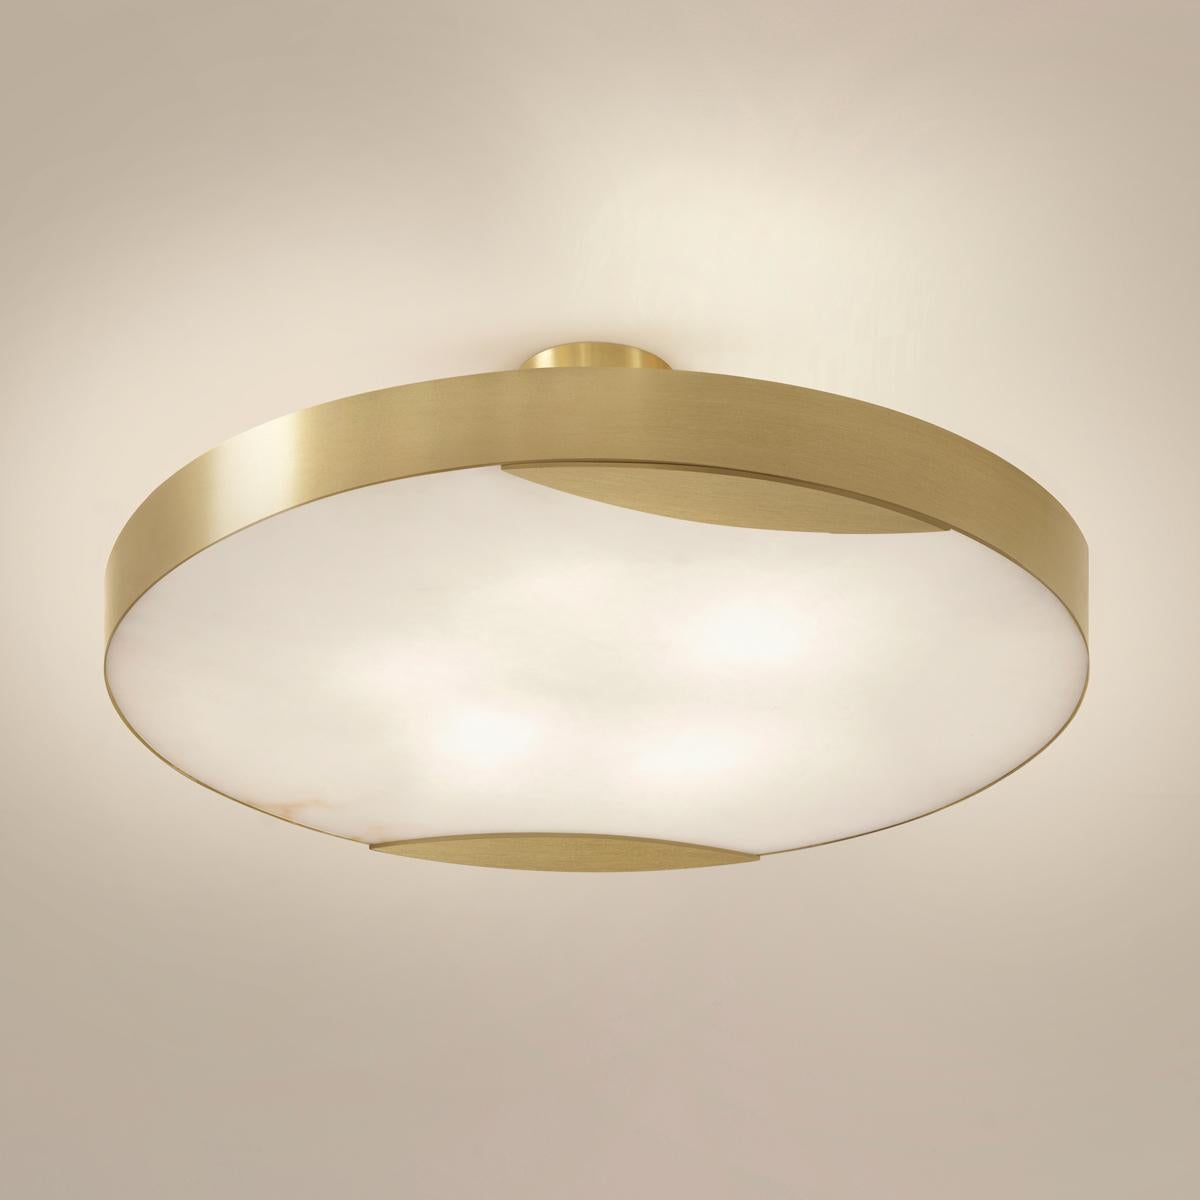 Italian Cloud N.1 Ceiling Light by Gaspare Asaro-Polished Brass Finish For Sale